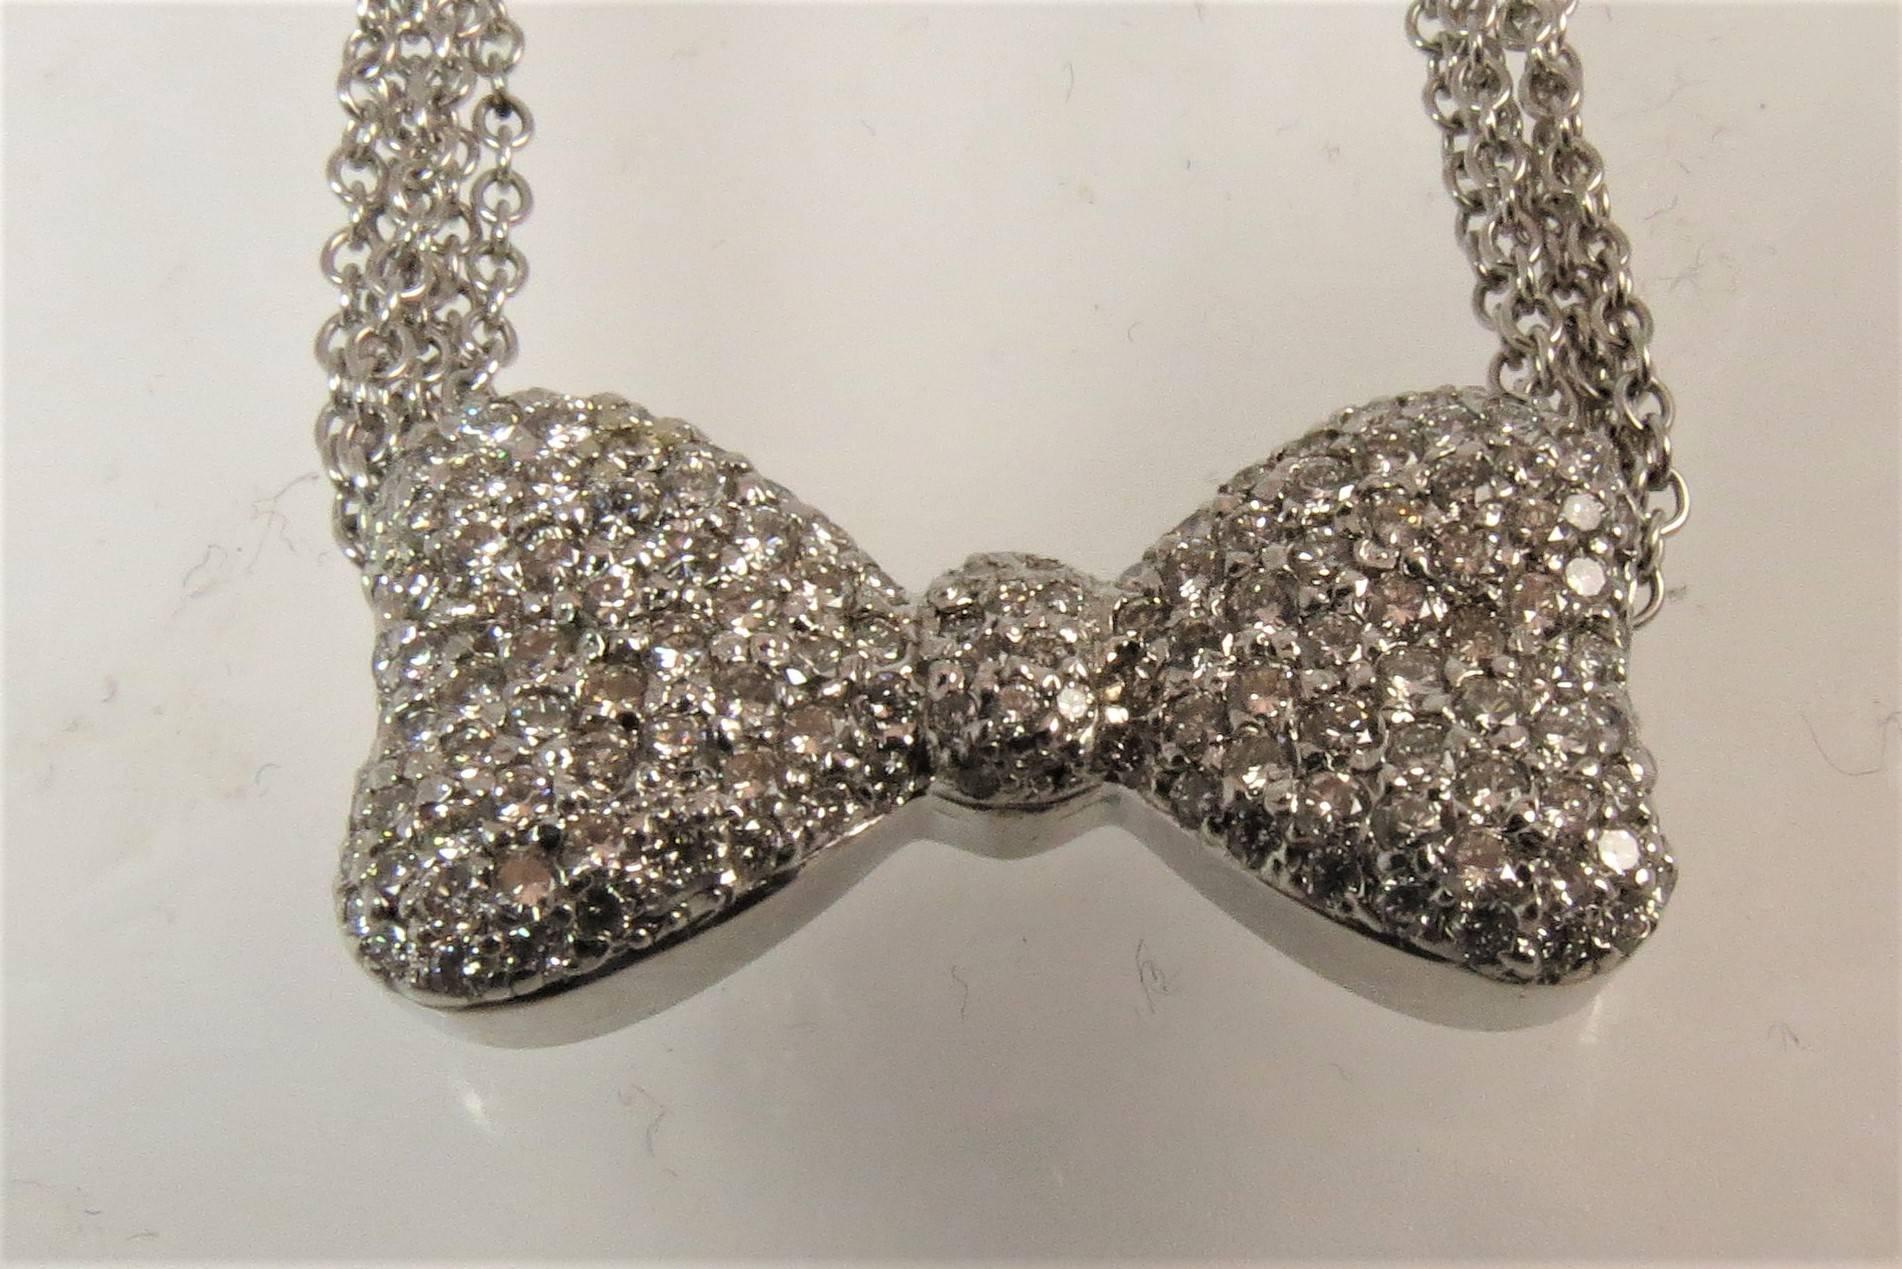 Stunning 14K white gold bow design, pave diamond necklace, weighing 1.80cts total, with five chains.
Length 15.5 inches